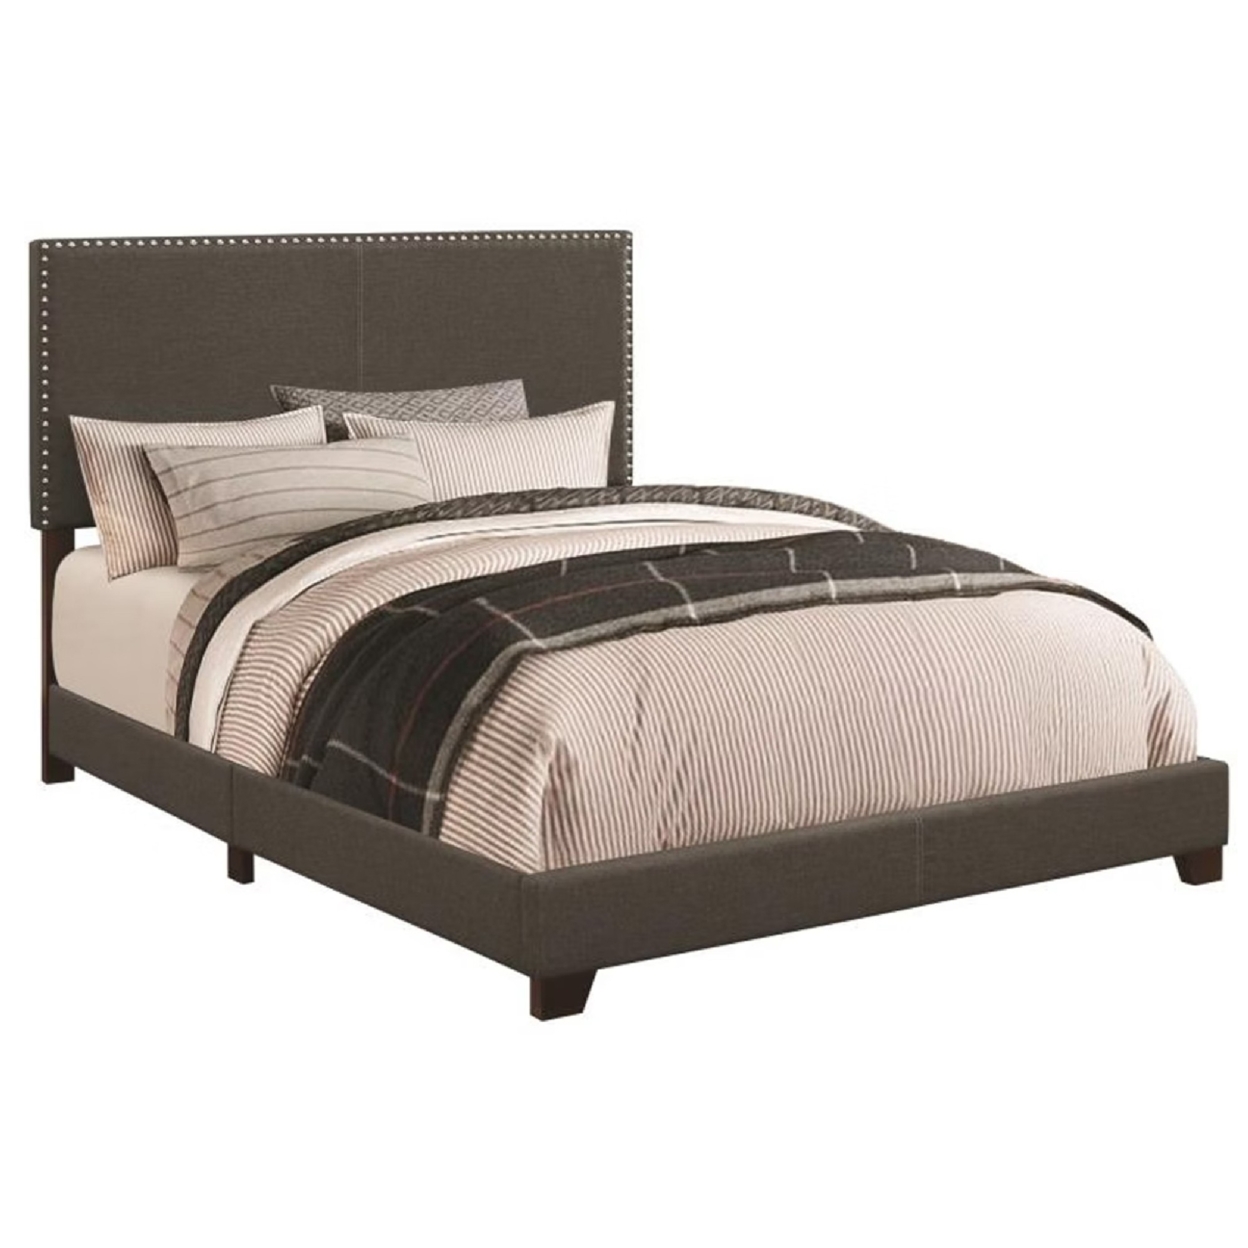 Fabric Upholstered Queen Size Platform Bed With Nail Head Trim, Charcoal Gray- Saltoro Sherpi